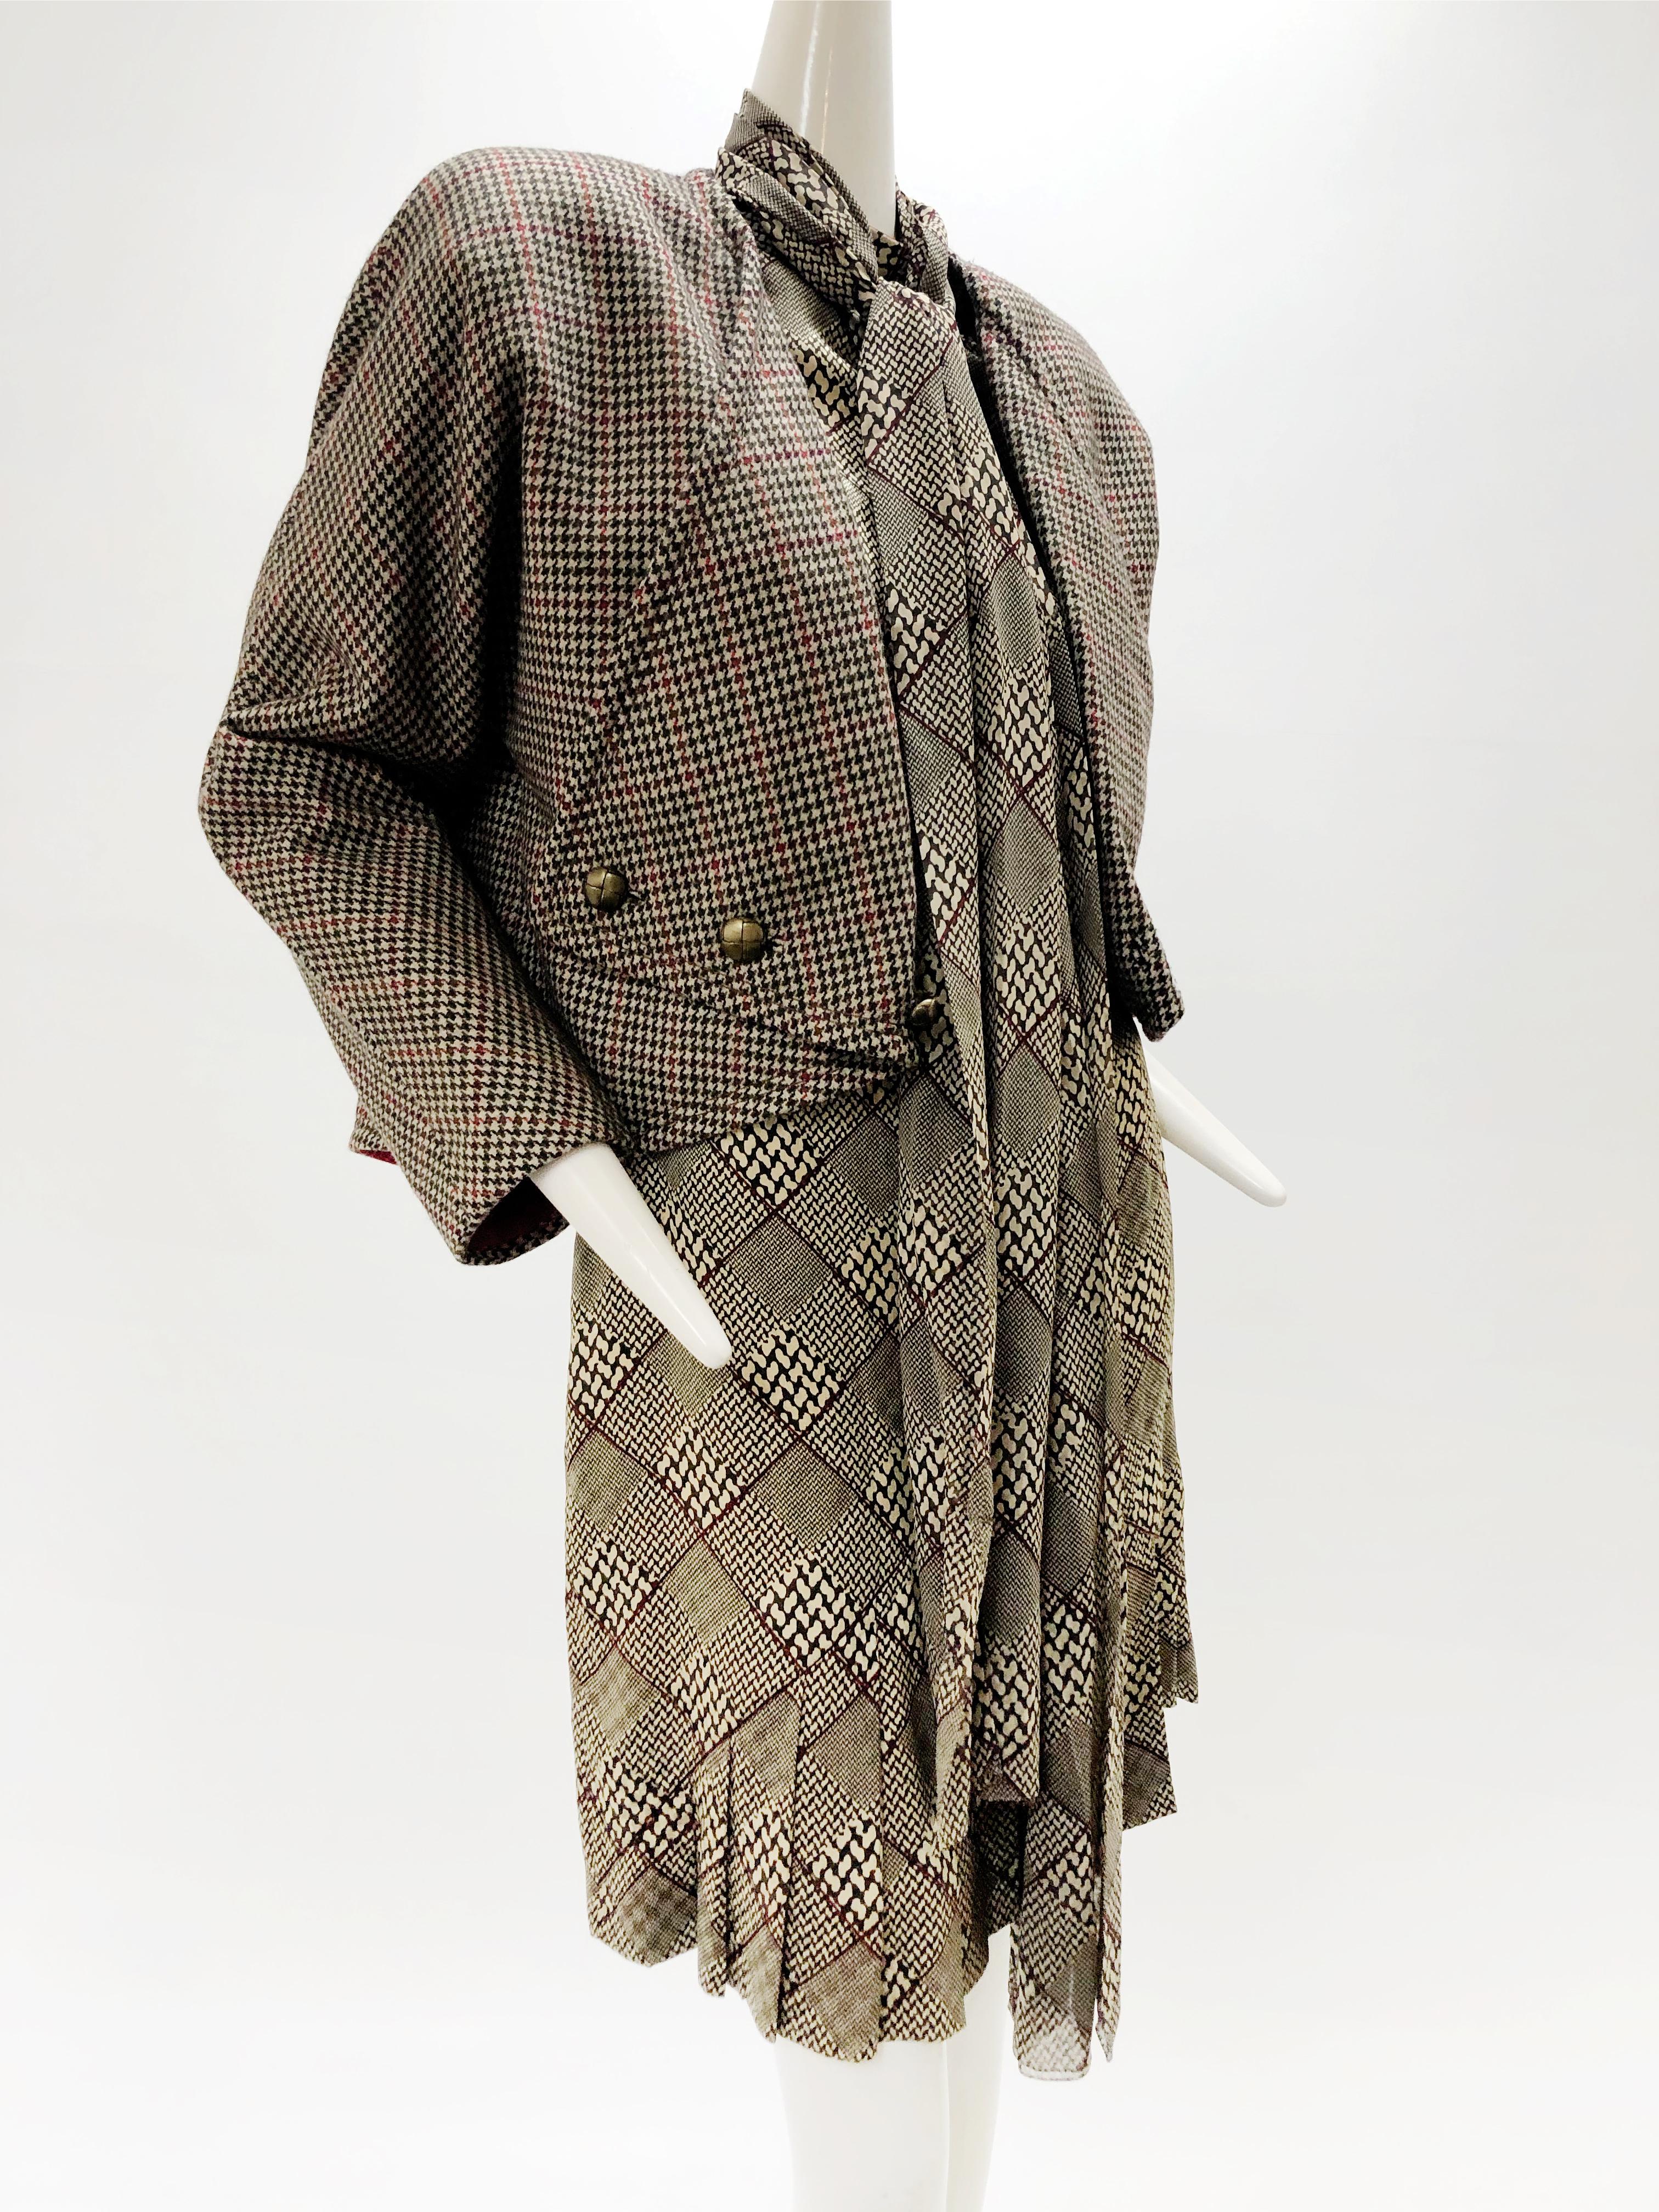 1980s Galanos Silk Dress in a Hounds Tooth Plaid W/ Matching Wool Jacket & Scarf For Sale 7